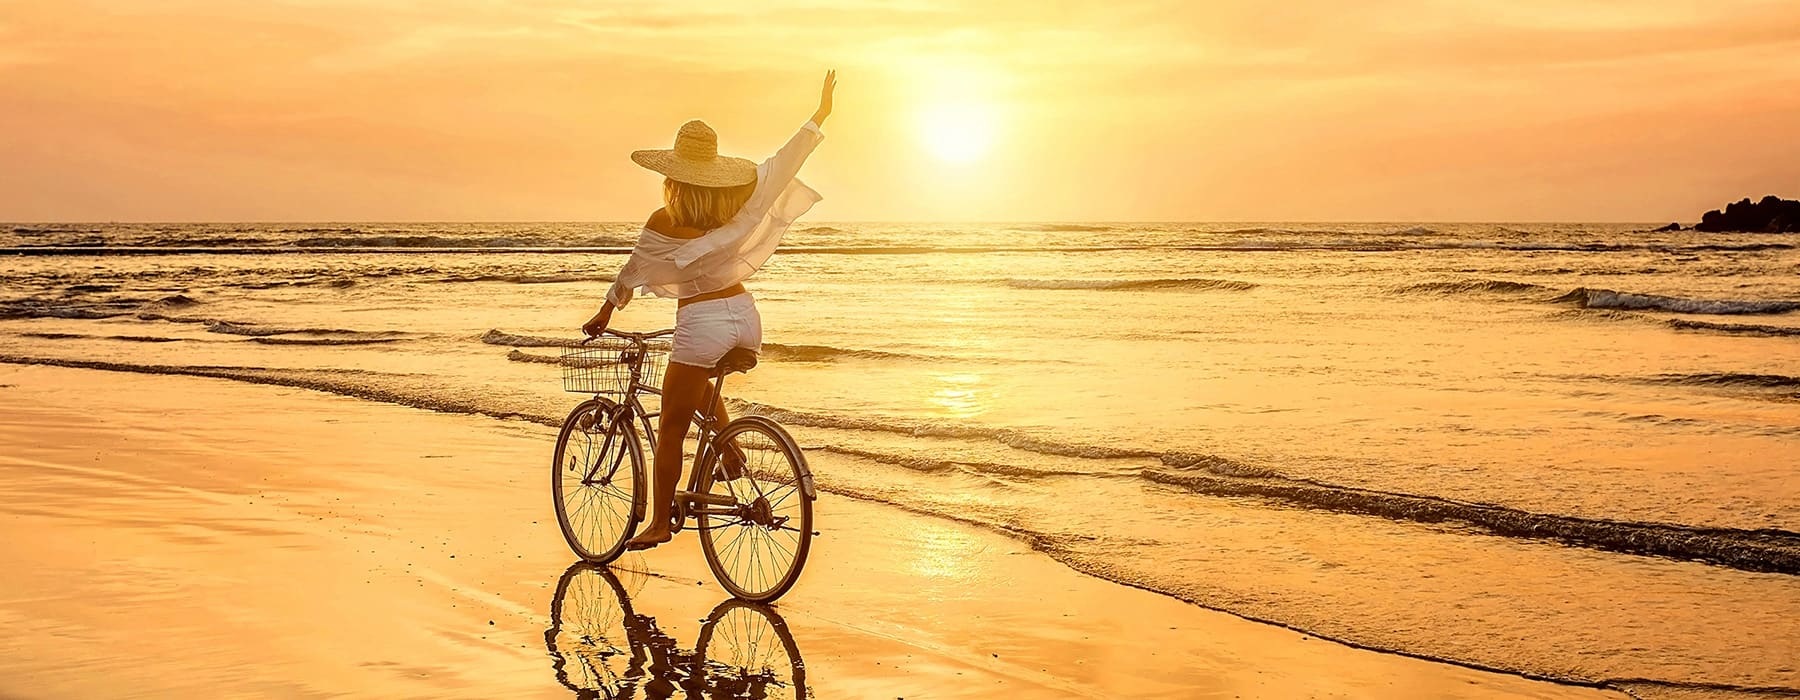 lifestyle image of a person riding a bicycle on the beach at sunset